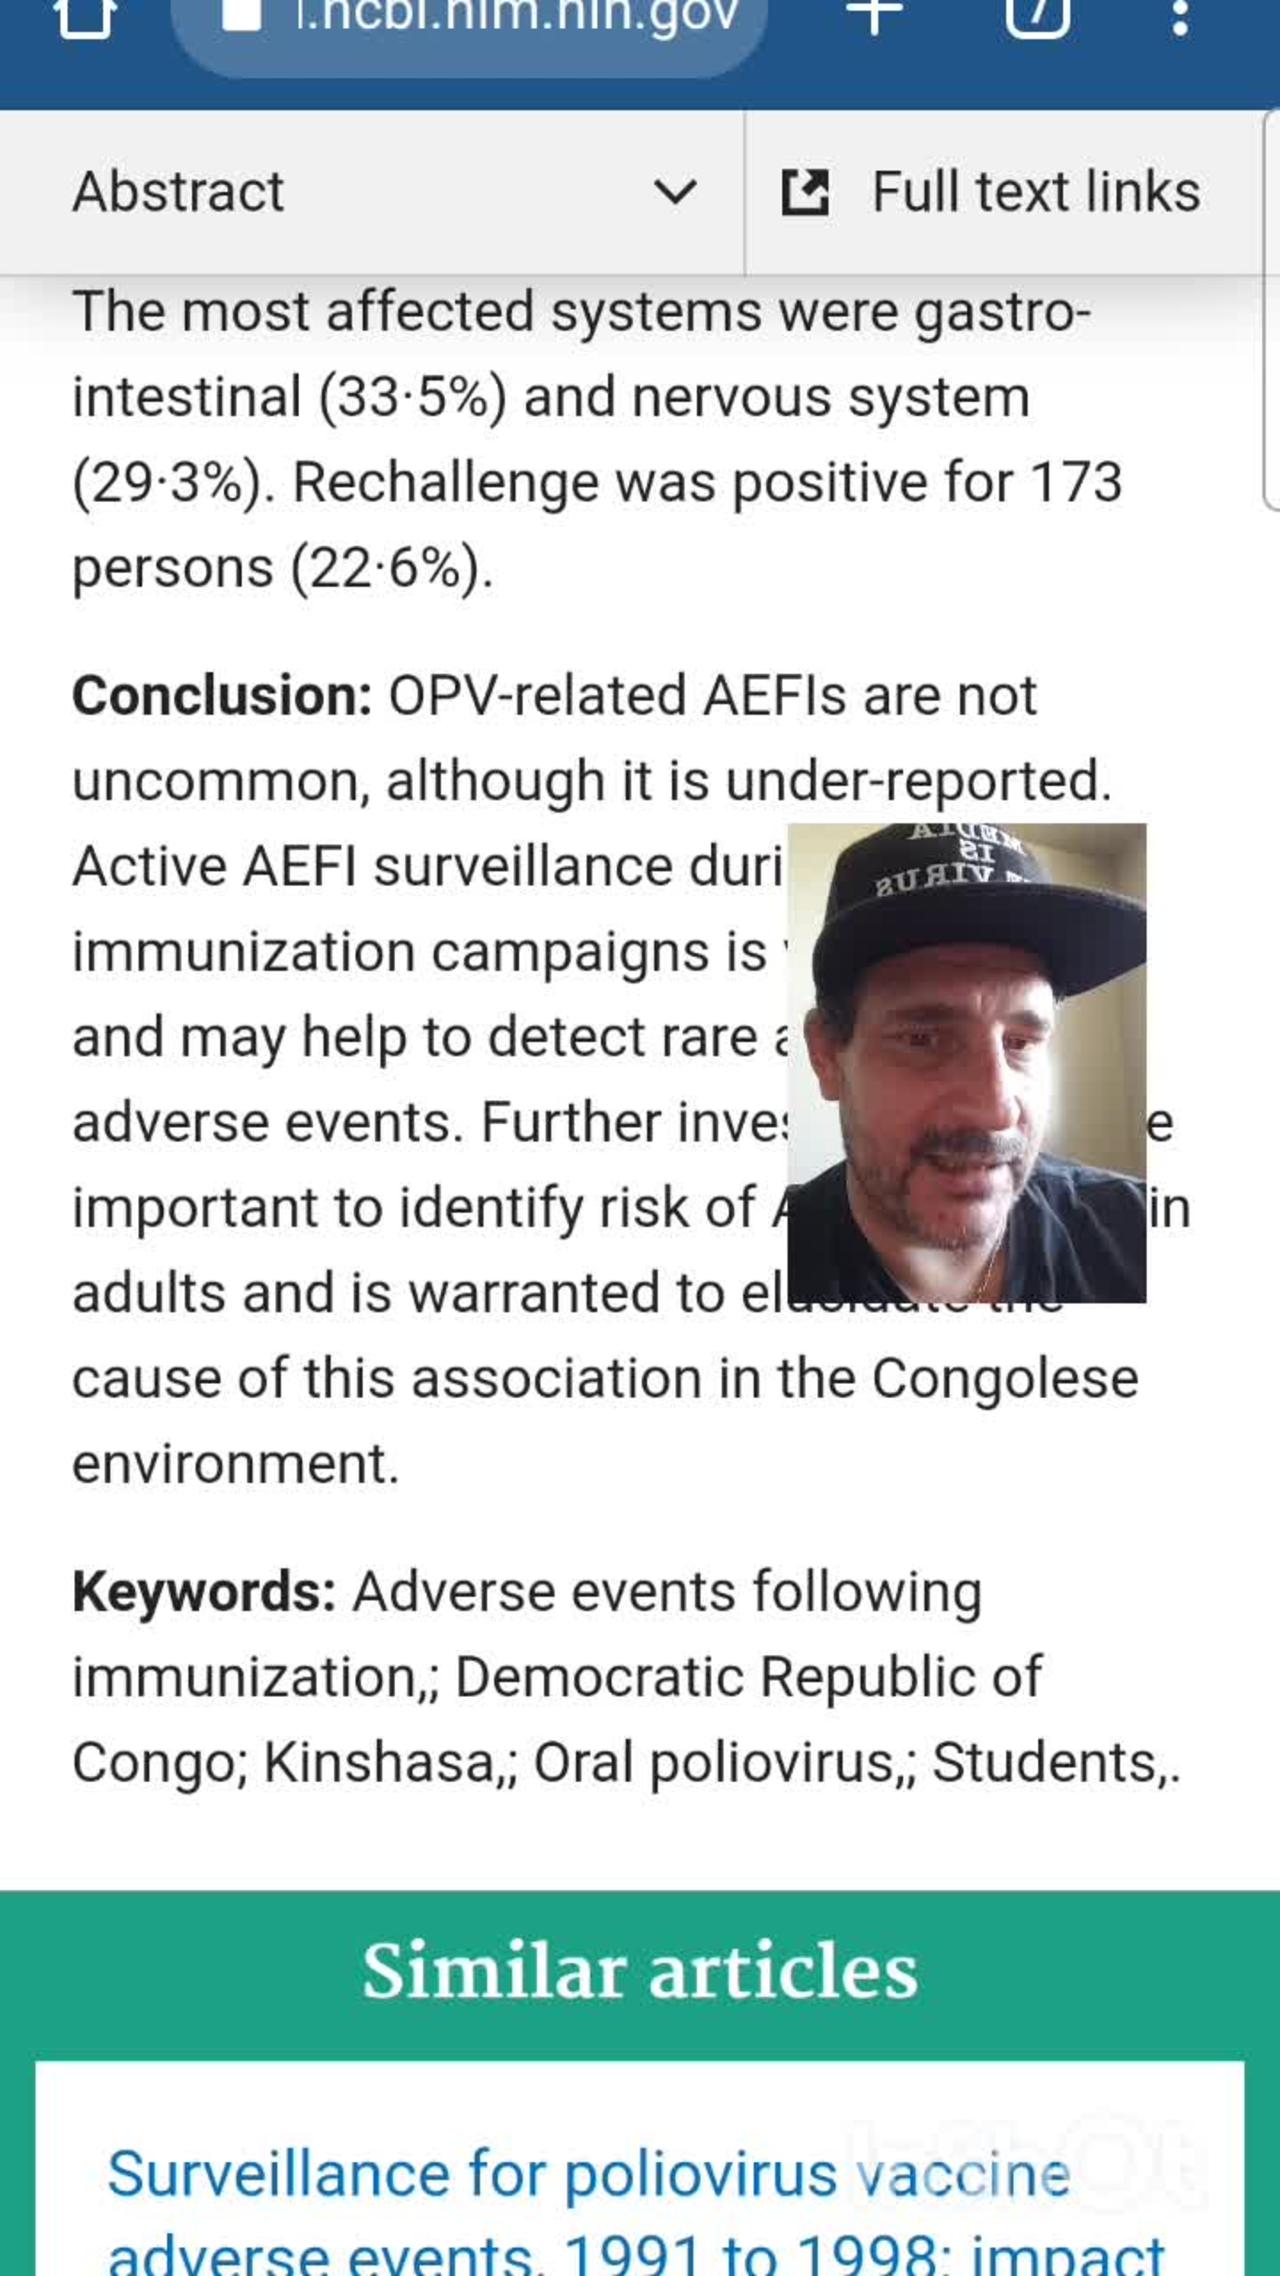 Important POLIO Information: Adverse events following immunization with oral poliovirus in Kinshasa, Democratic Republic of Cong